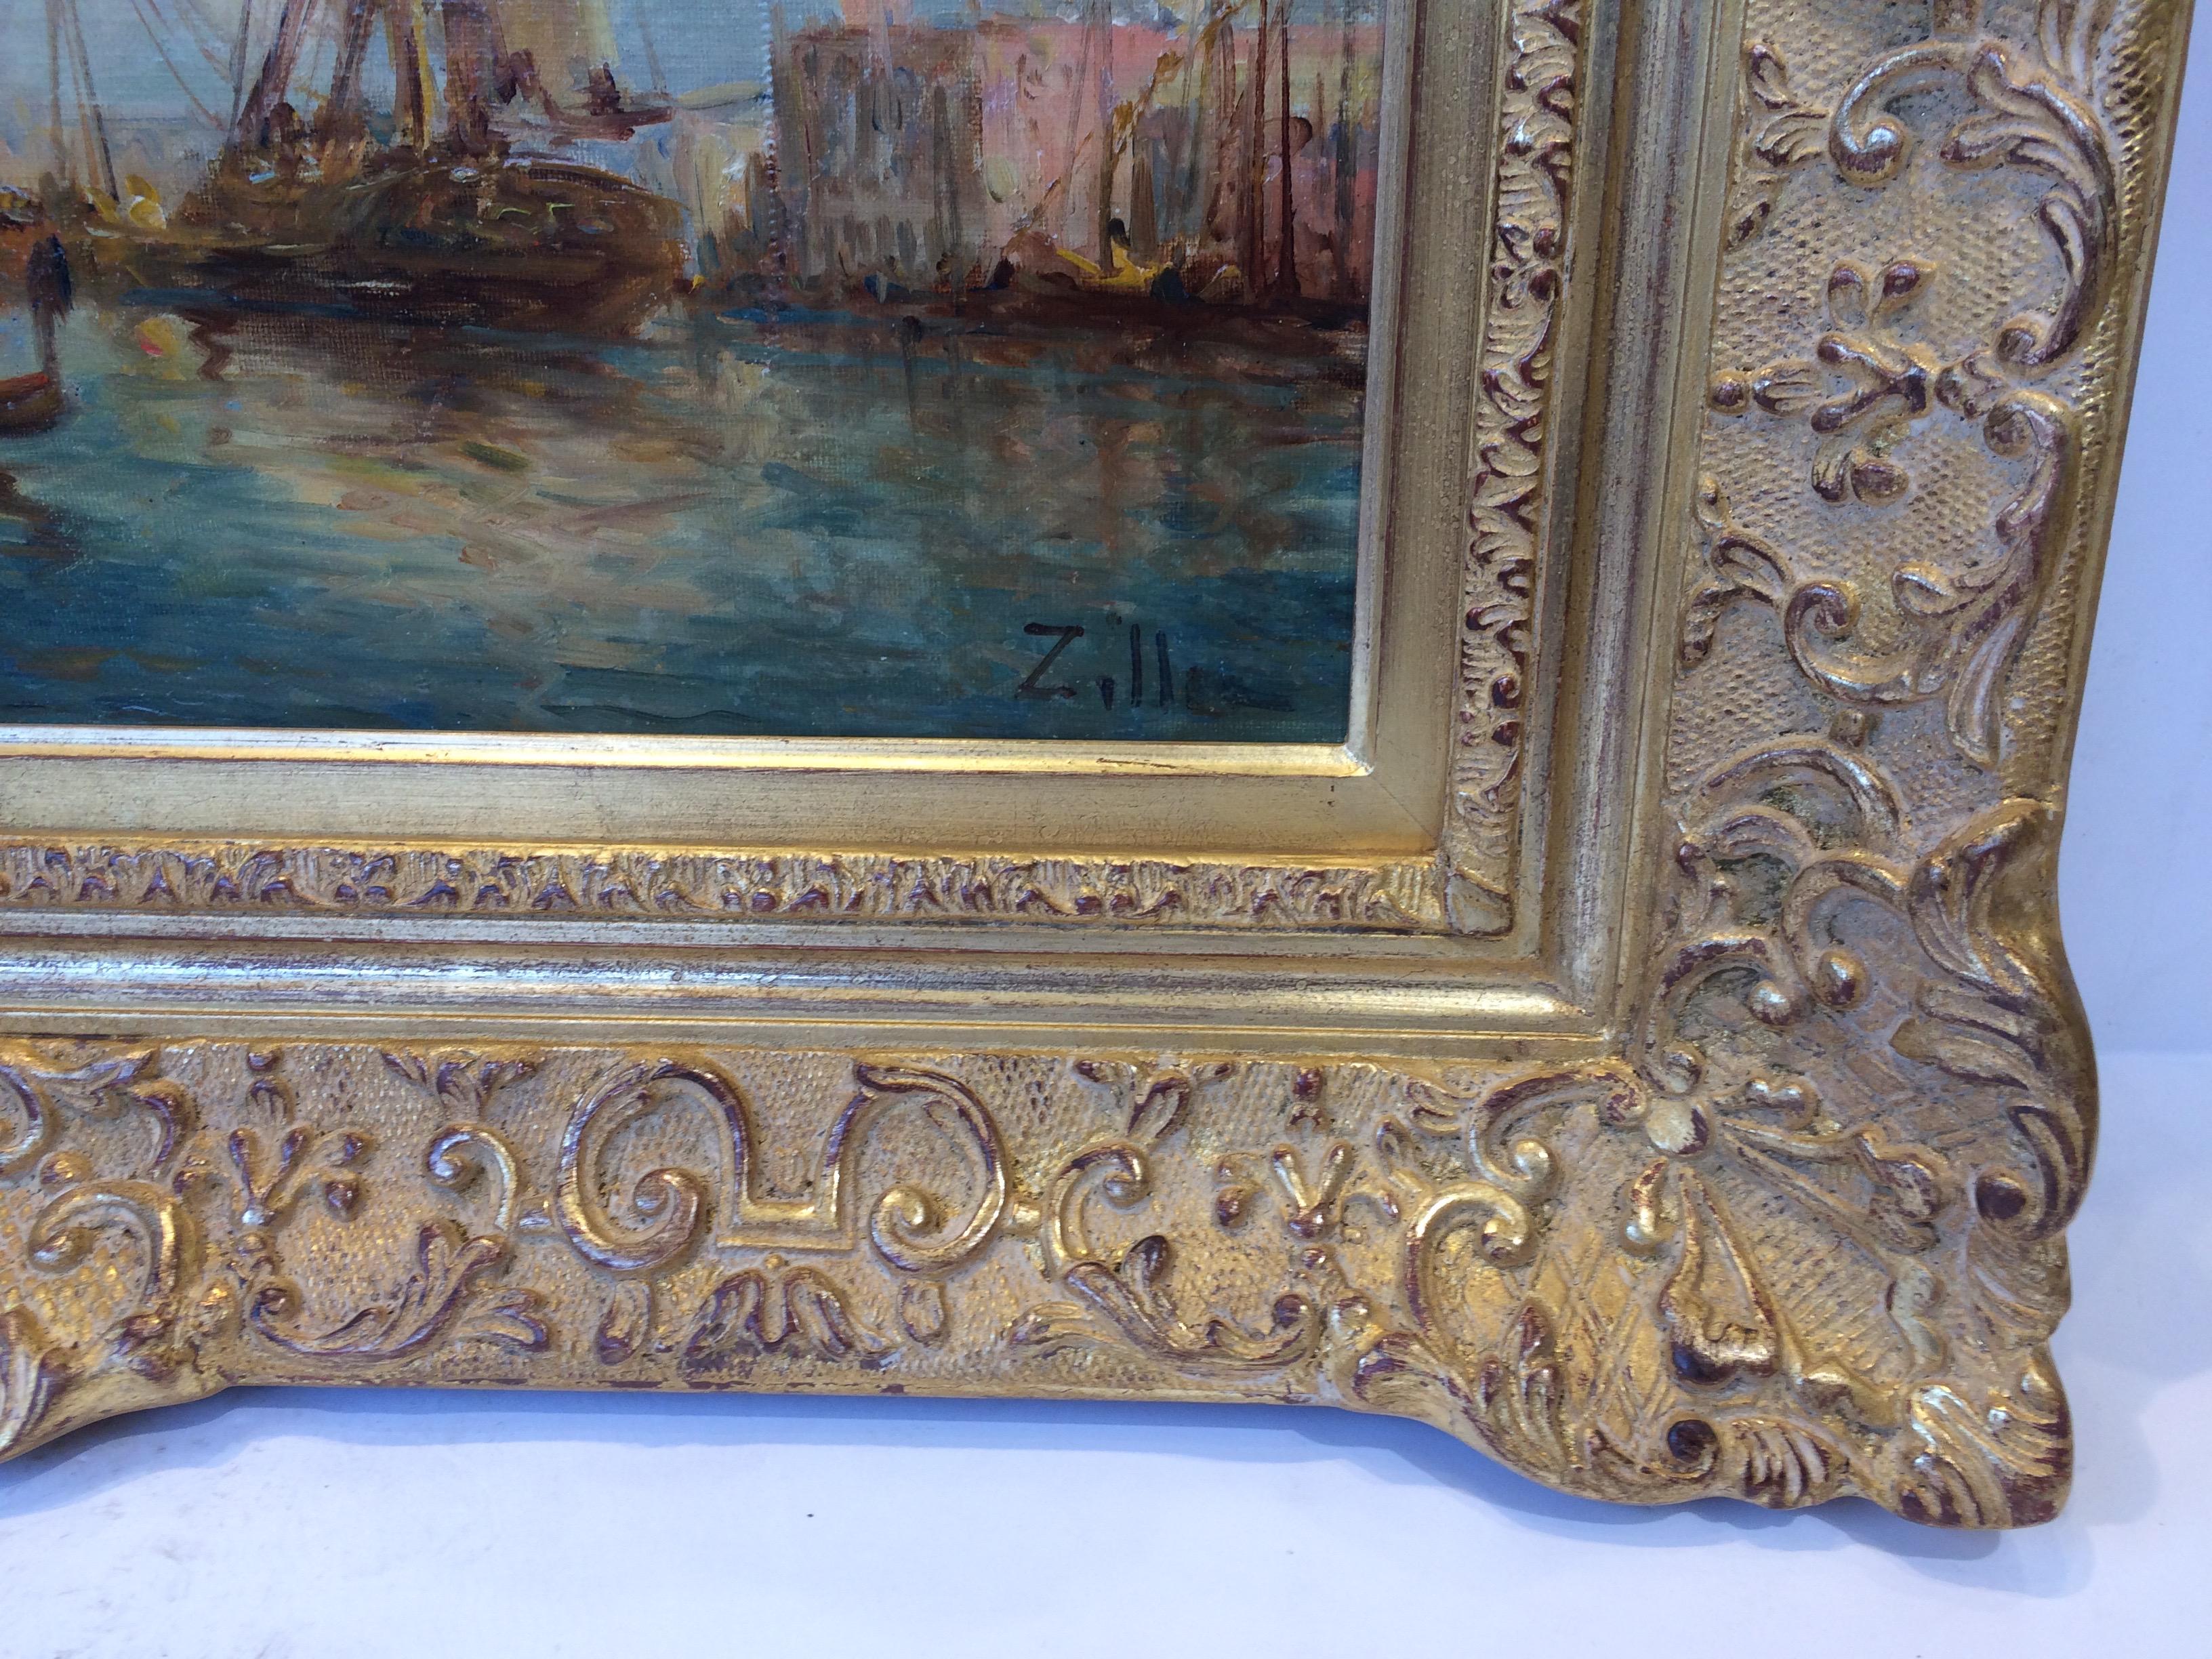 ZILLER Leopold (1859-1910)
Views of Venice and Istambul in Pair
Oils on canvas signed low right
Frames with gold leaves (Gault - Paris)
Dim canvas (each) : 33 X 46 cm
Dim Frames (each)  : 48 X 61 cm

ZILLER Leopold (1859-1910)
German painter